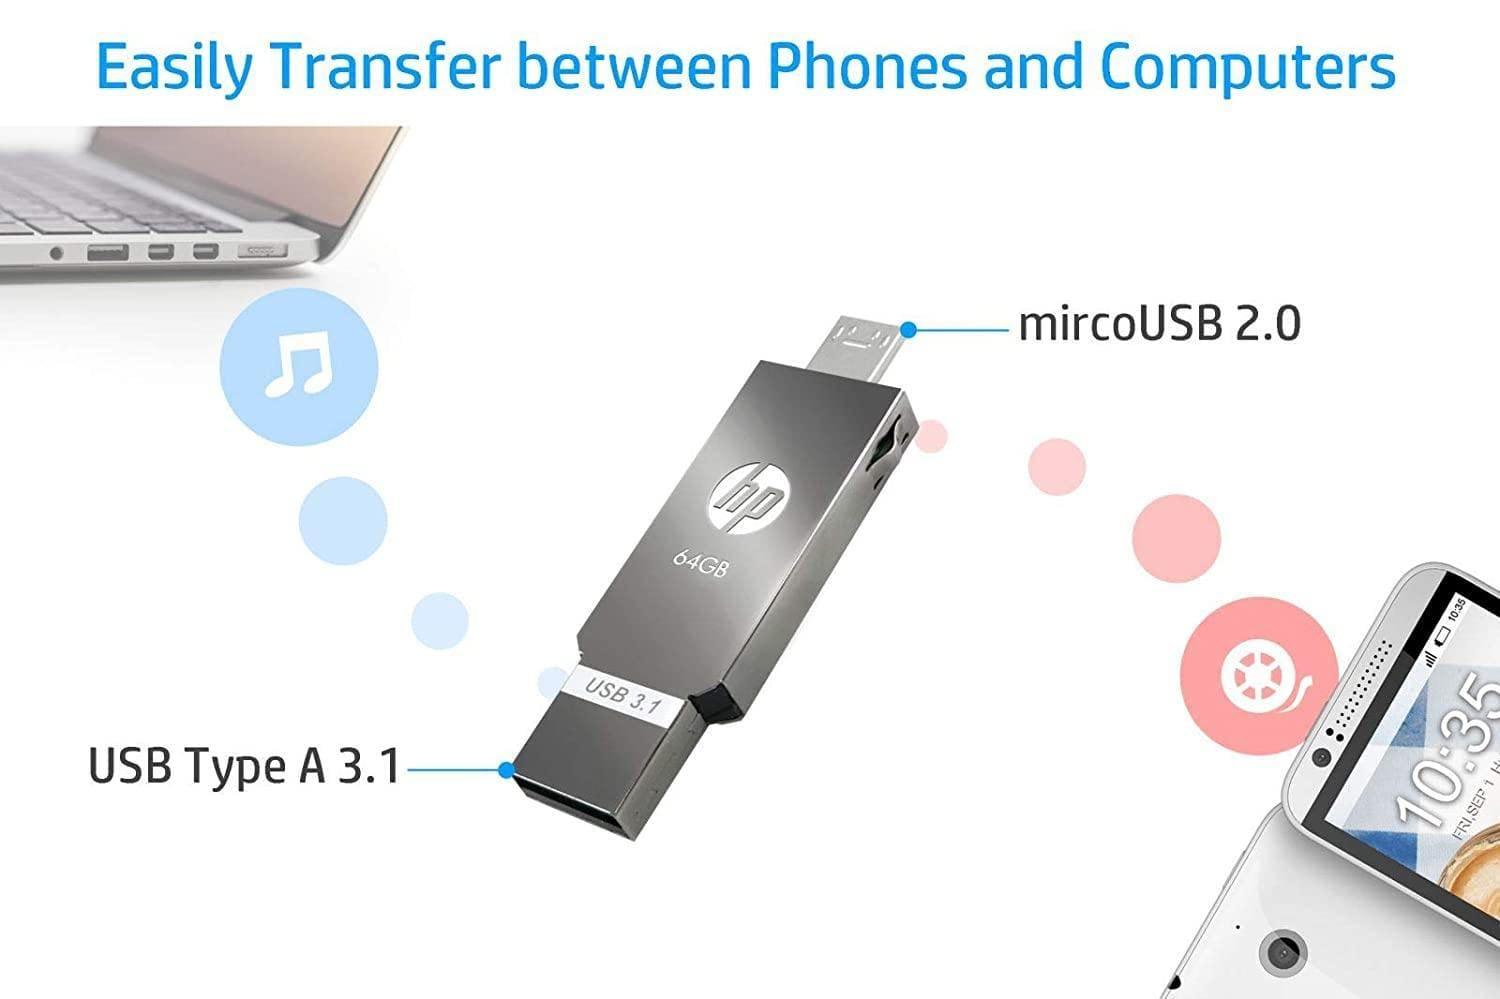 HP USB Pendrive with OTG X302M-pendrives-dealsplant